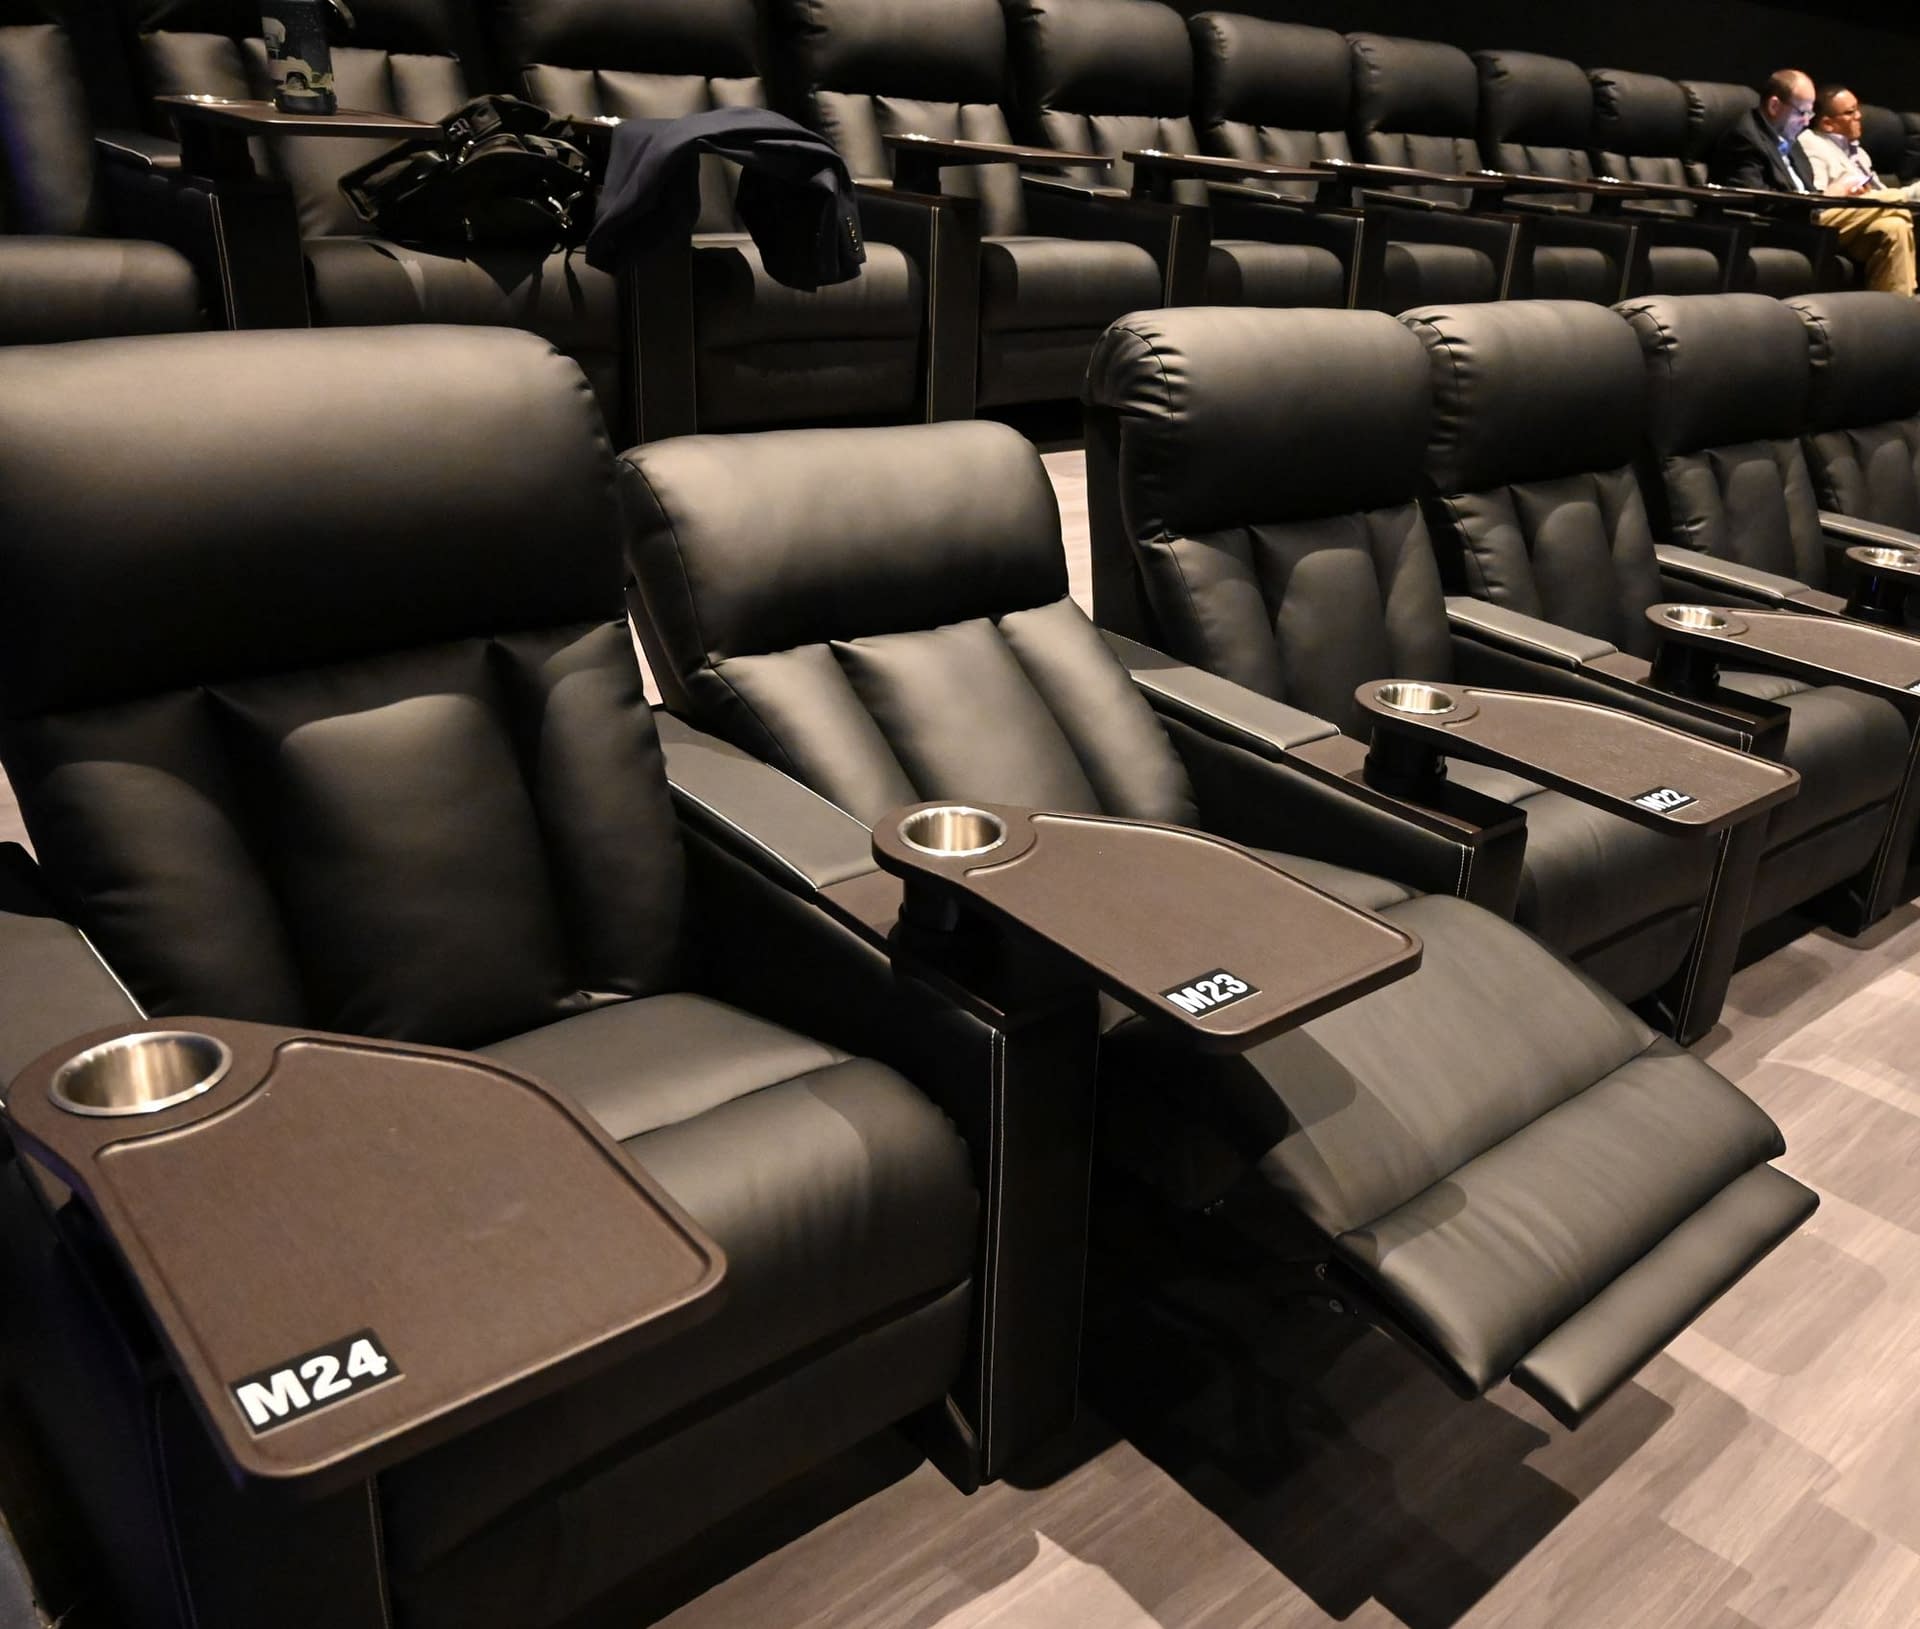 [CinemaCon 2019] Previewing the New Sony Digital Cinema Premium Large Format Auditorium at Galaxy Theatres